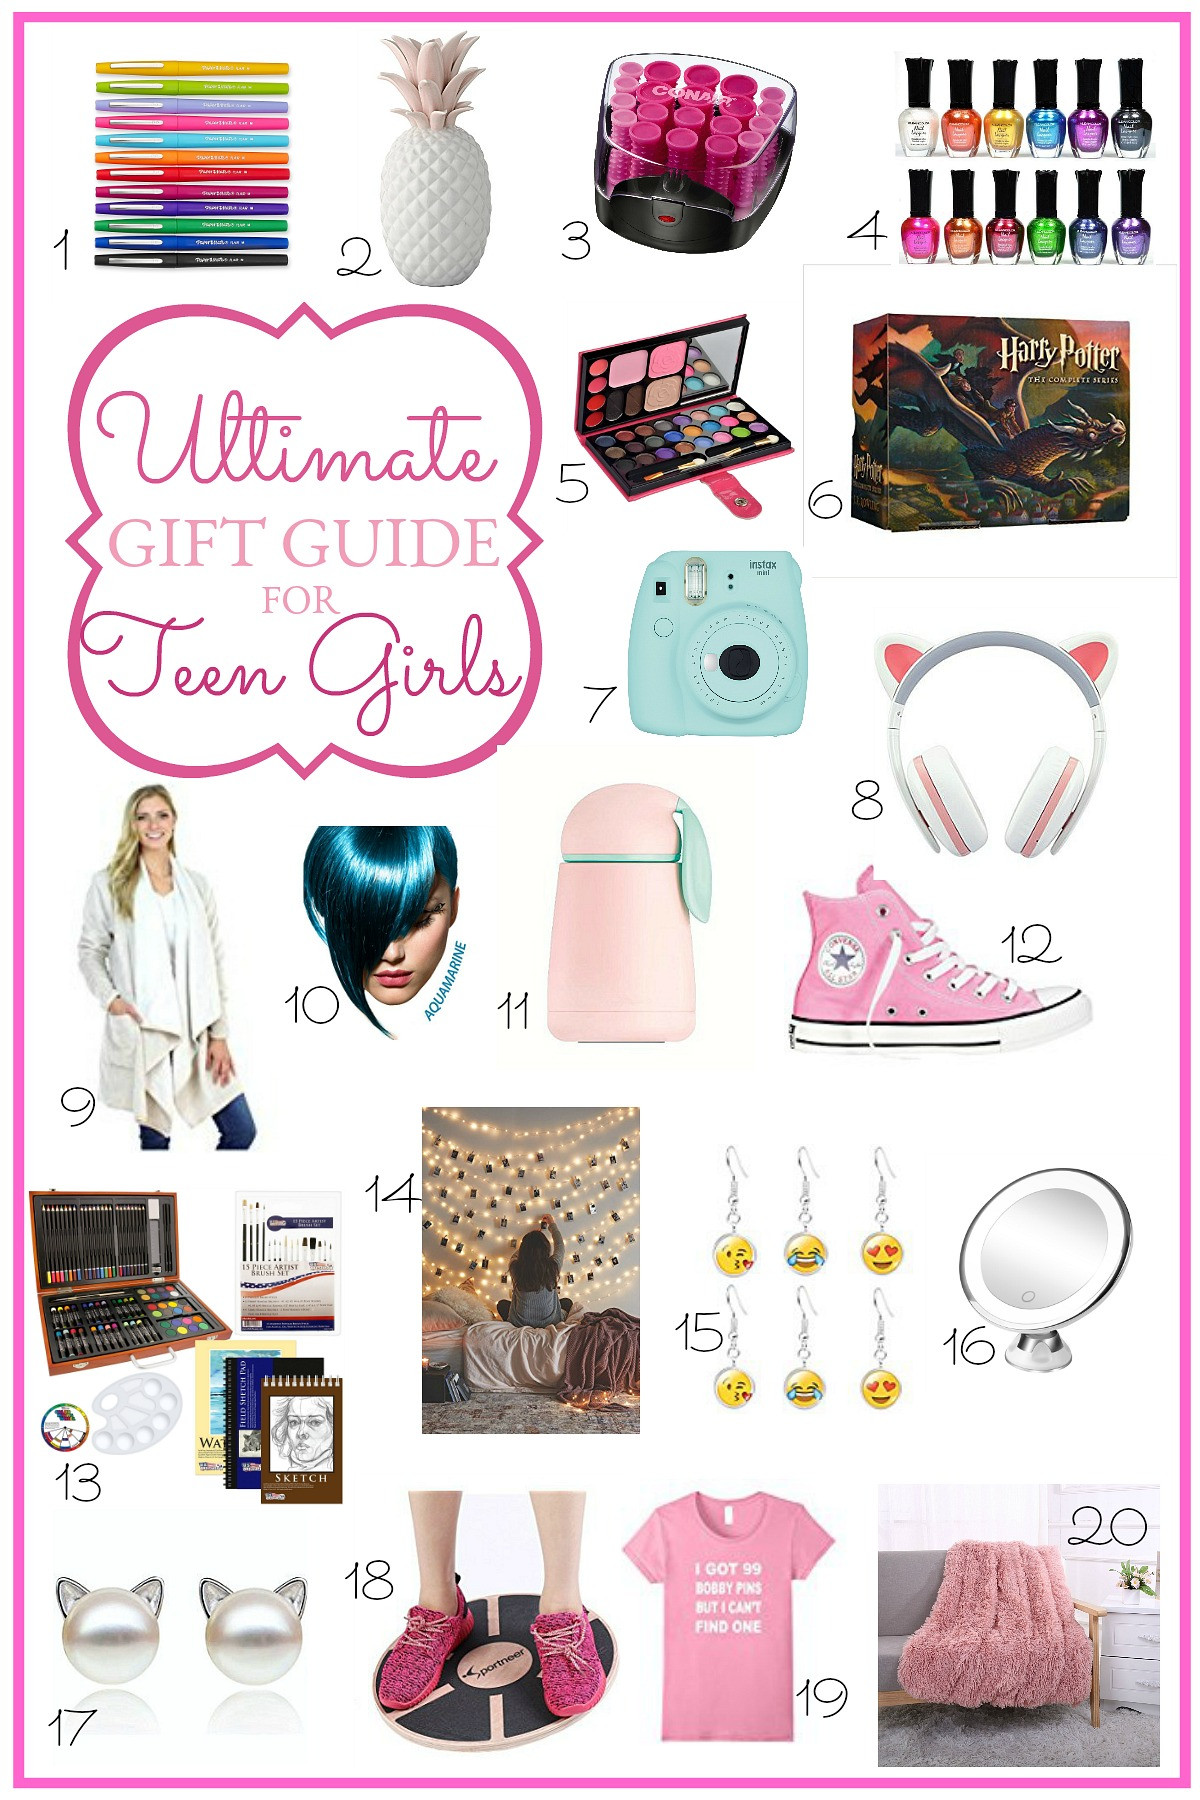 Christmas Gift Ideas For Teens
 Ultimate Holiday Gift Guide for Teen Girls